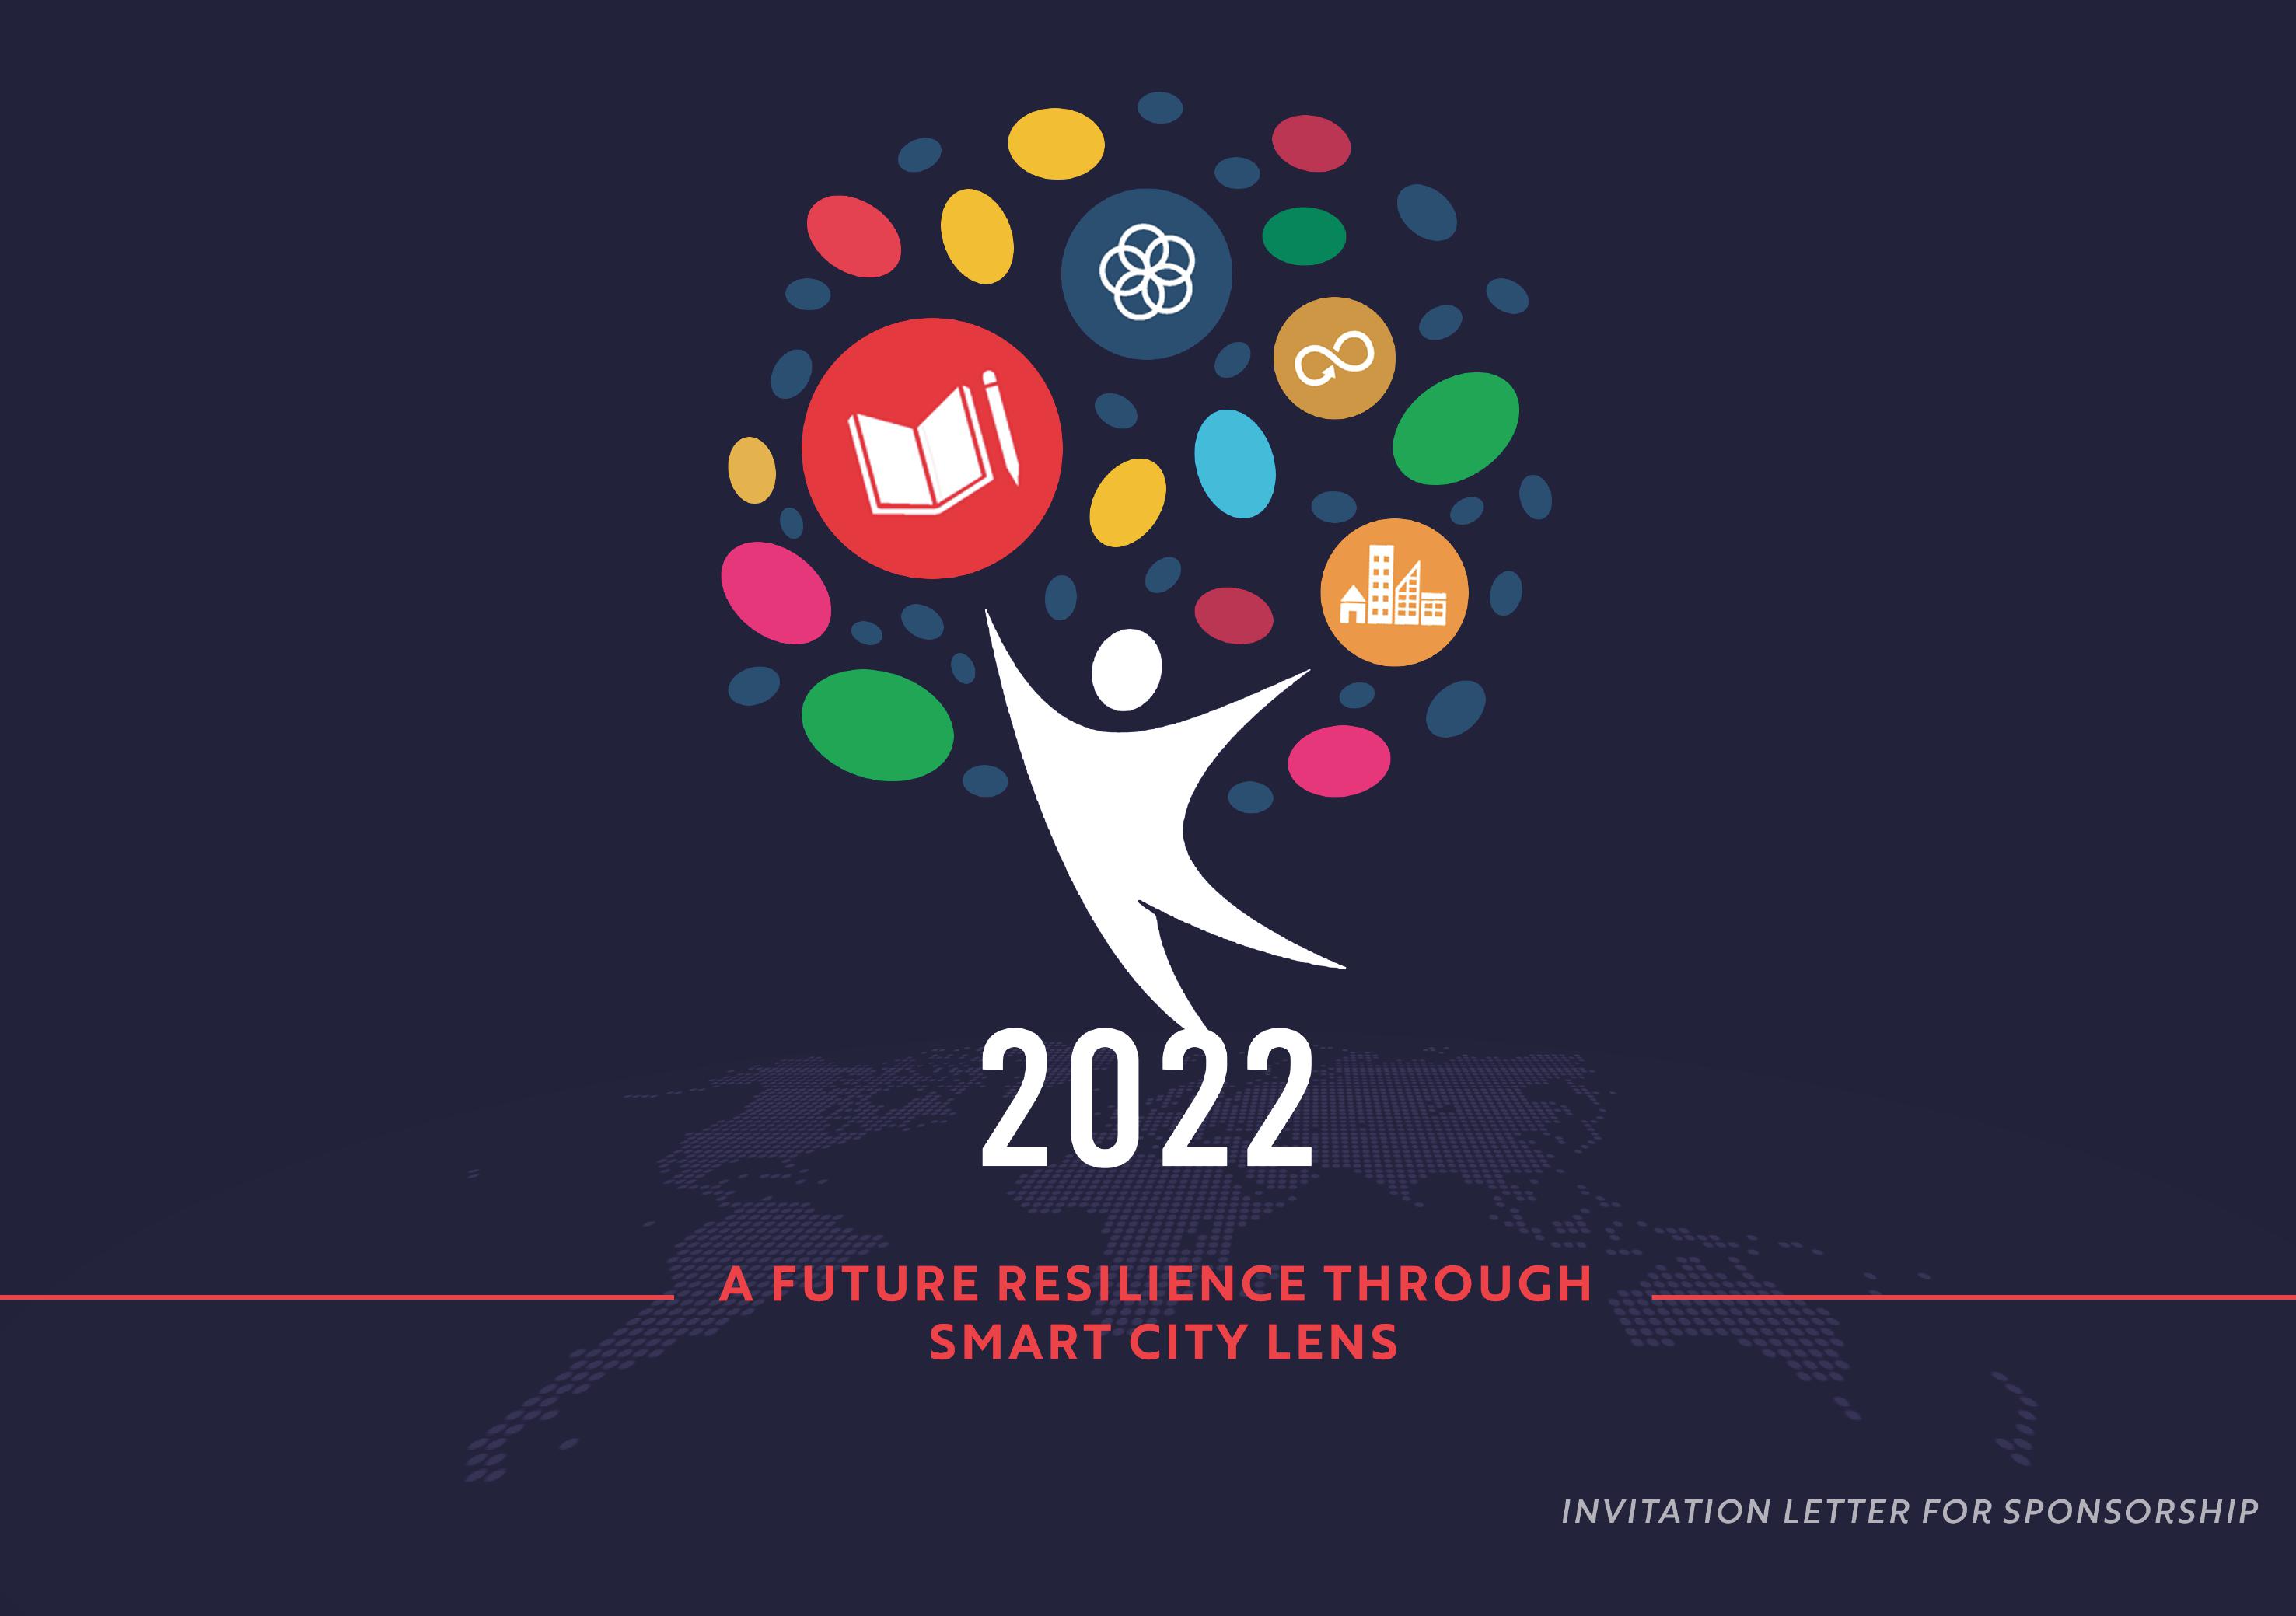 ISCM Event Series 2022 - A Future Resilience Through Smart City Lens